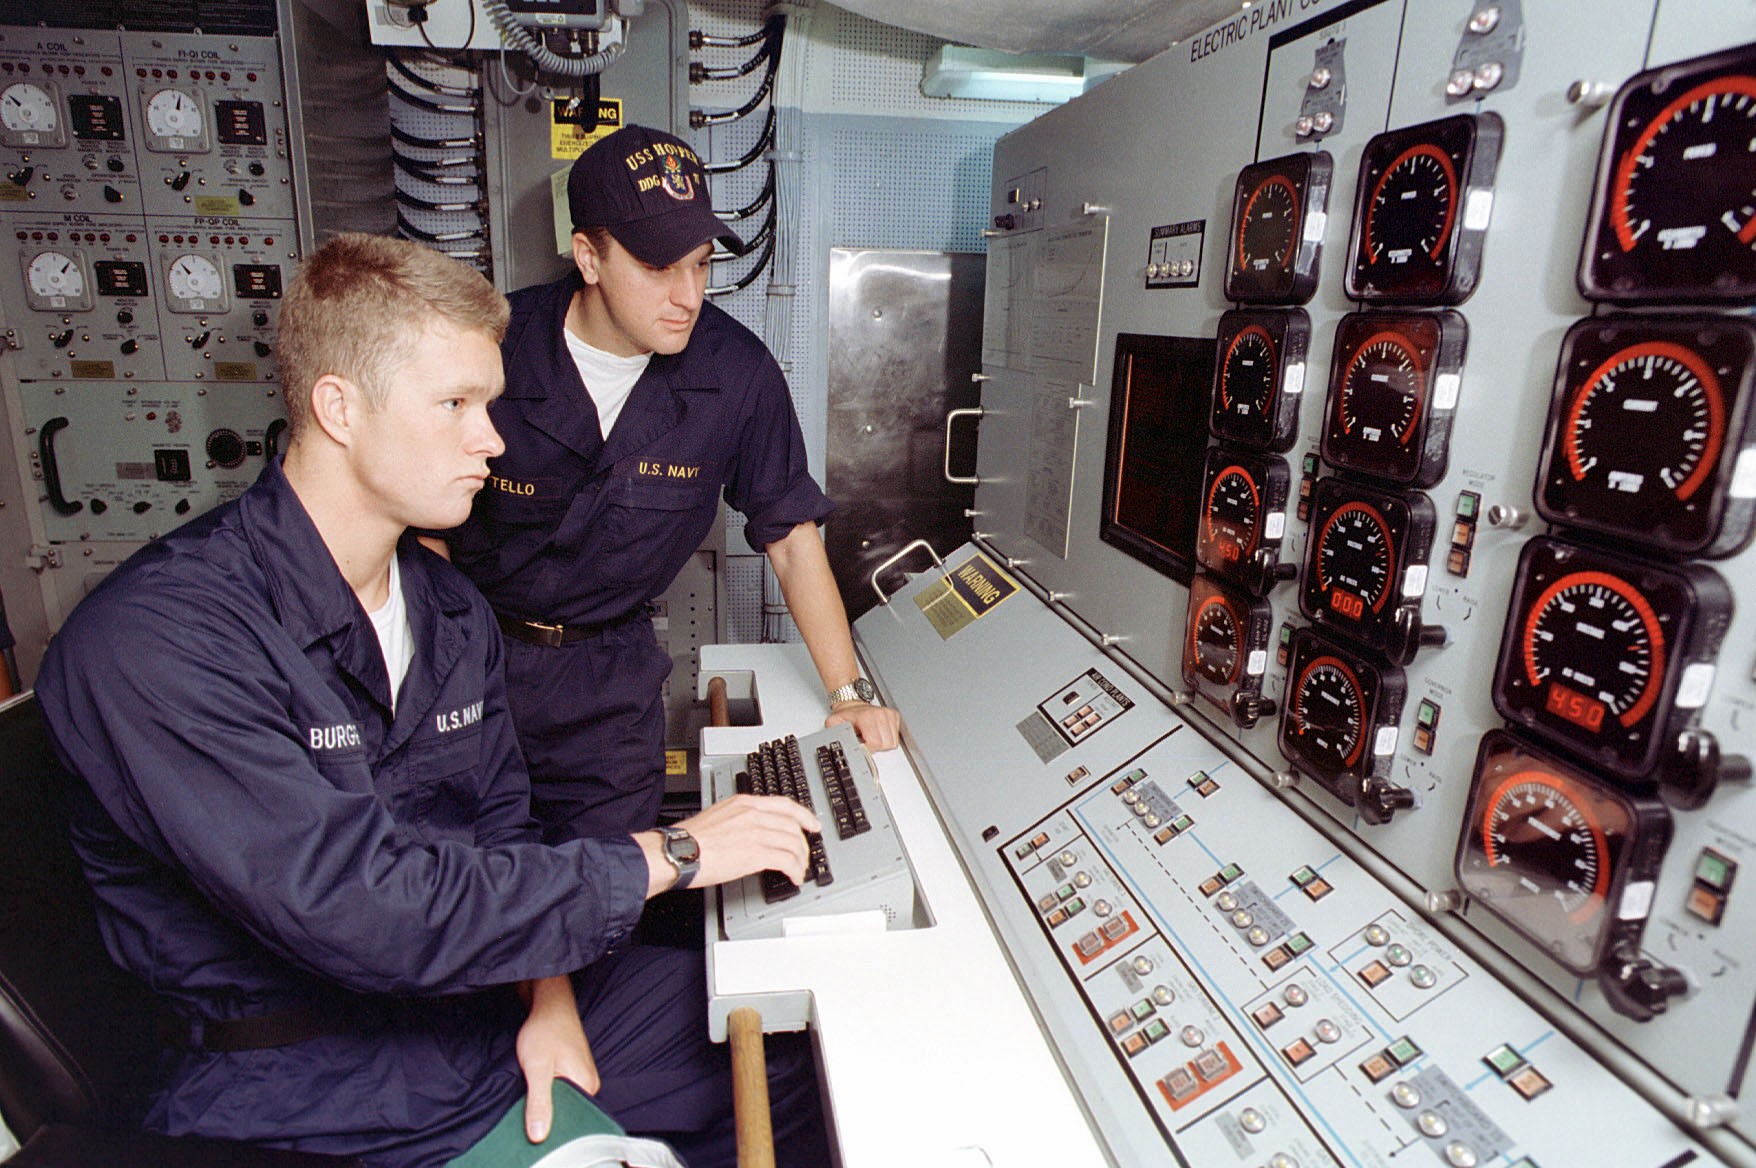 ddg-70 uss hopper guided missile destroyer arleigh burke class aegis bmd 65 electric plant control console